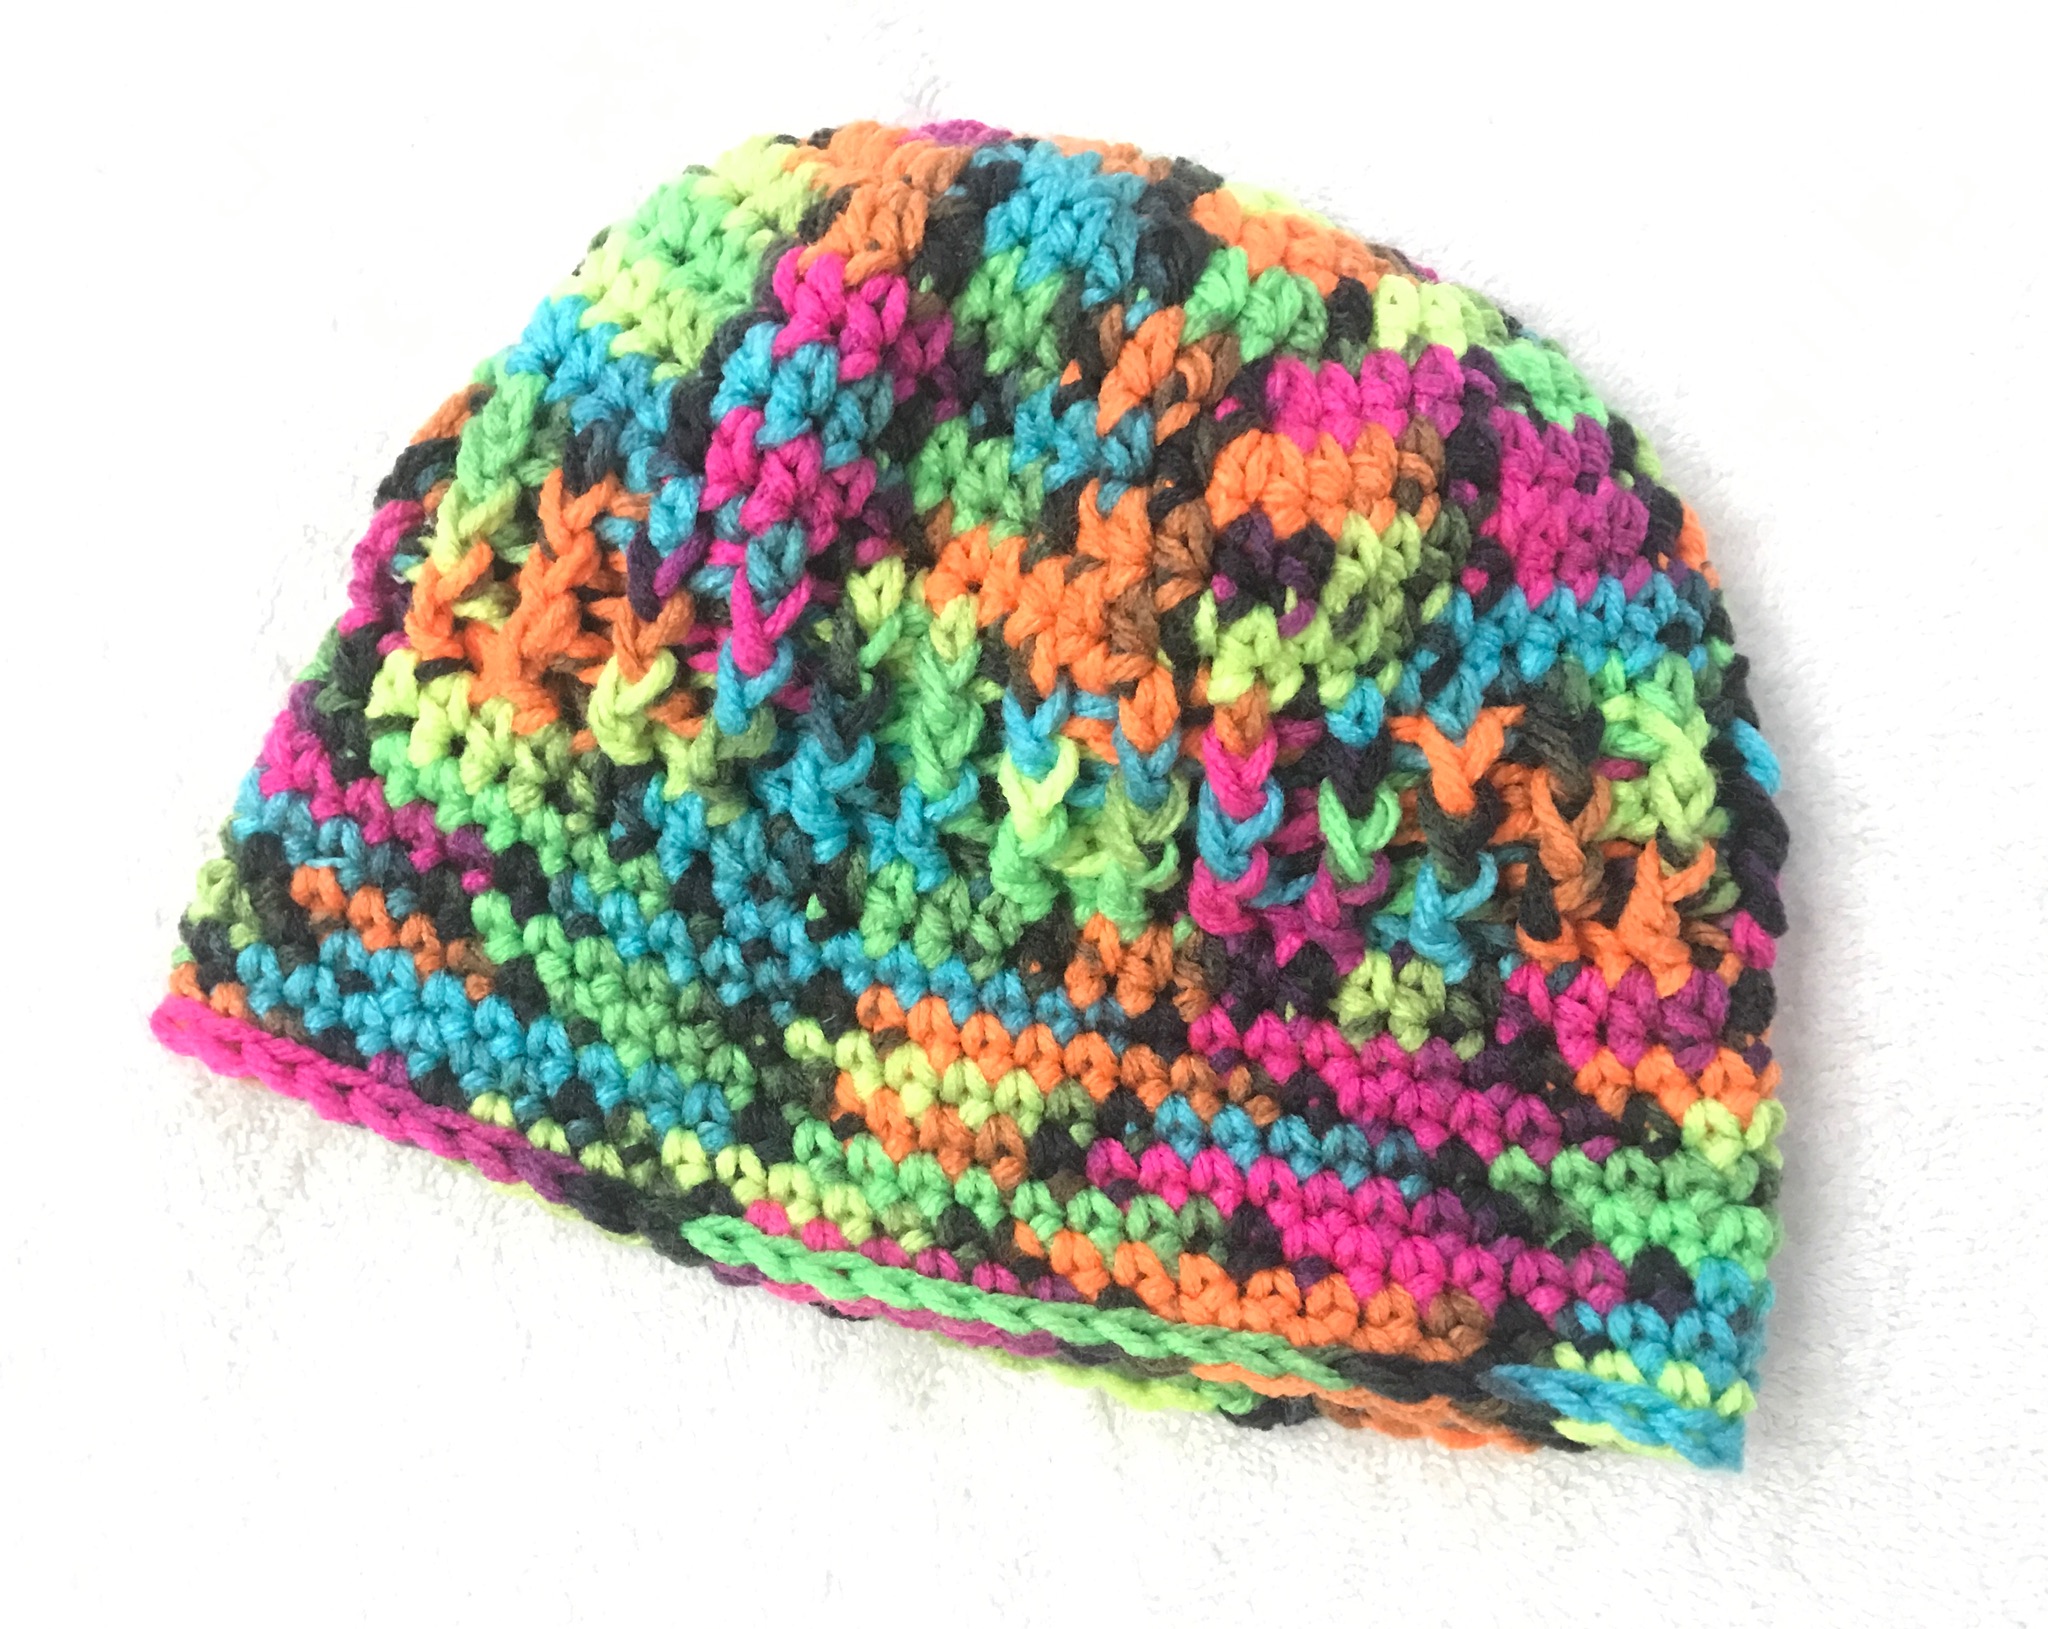 Don't you love the bright colors? What a fun way to use Red Heart Super Saver Blacklight Yarn for this crochet hat.